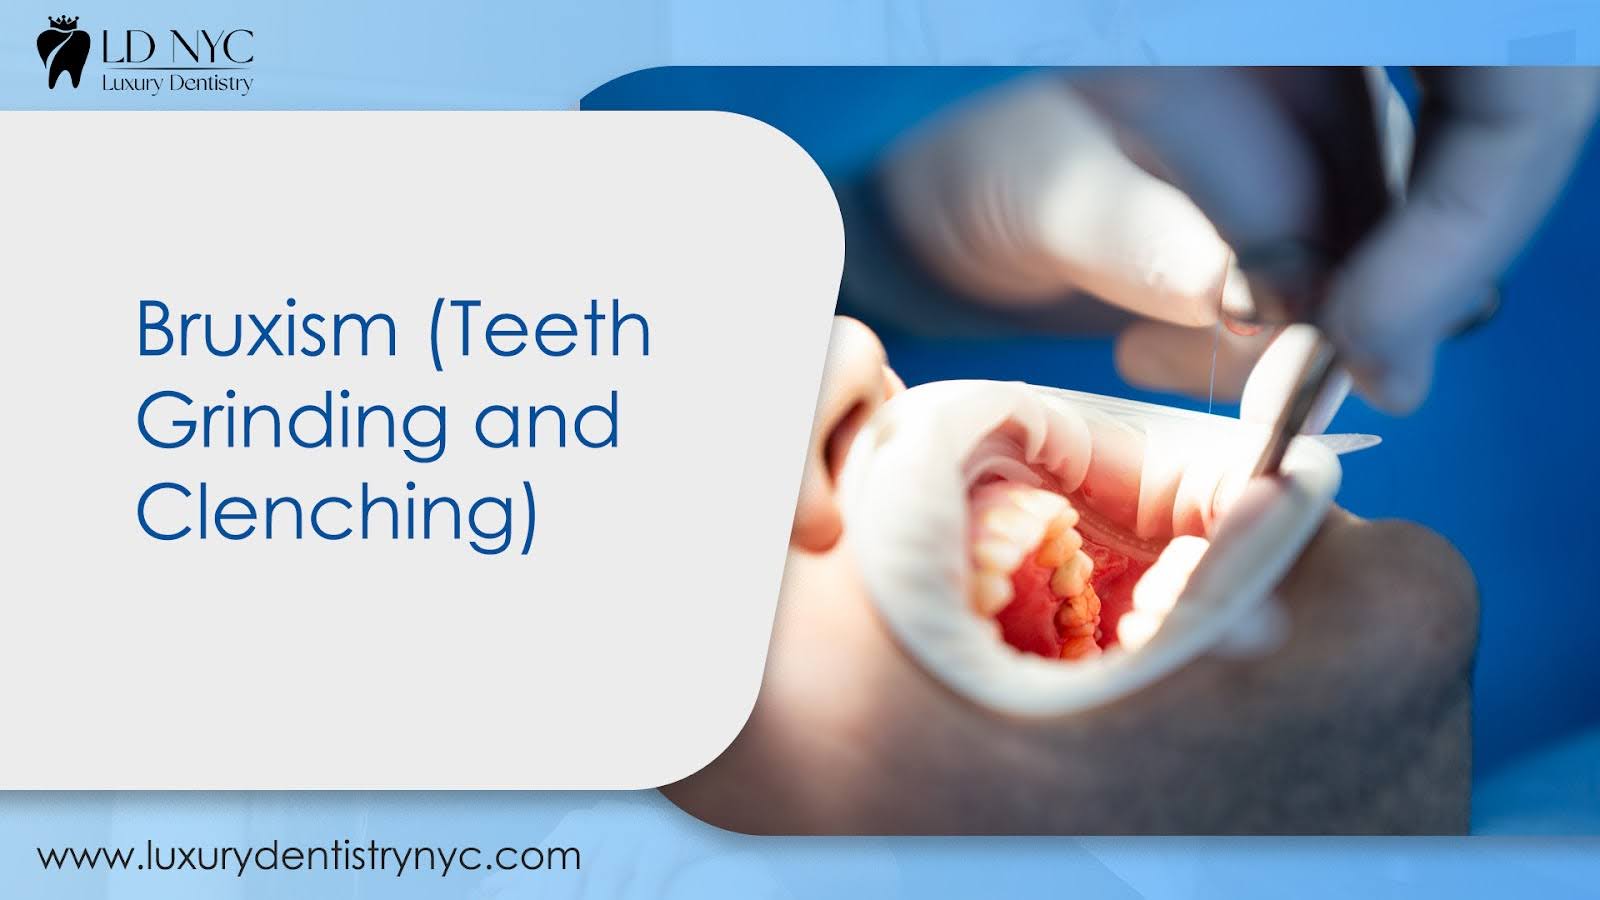 Bruxism (Teeth Grinding and Clenching)